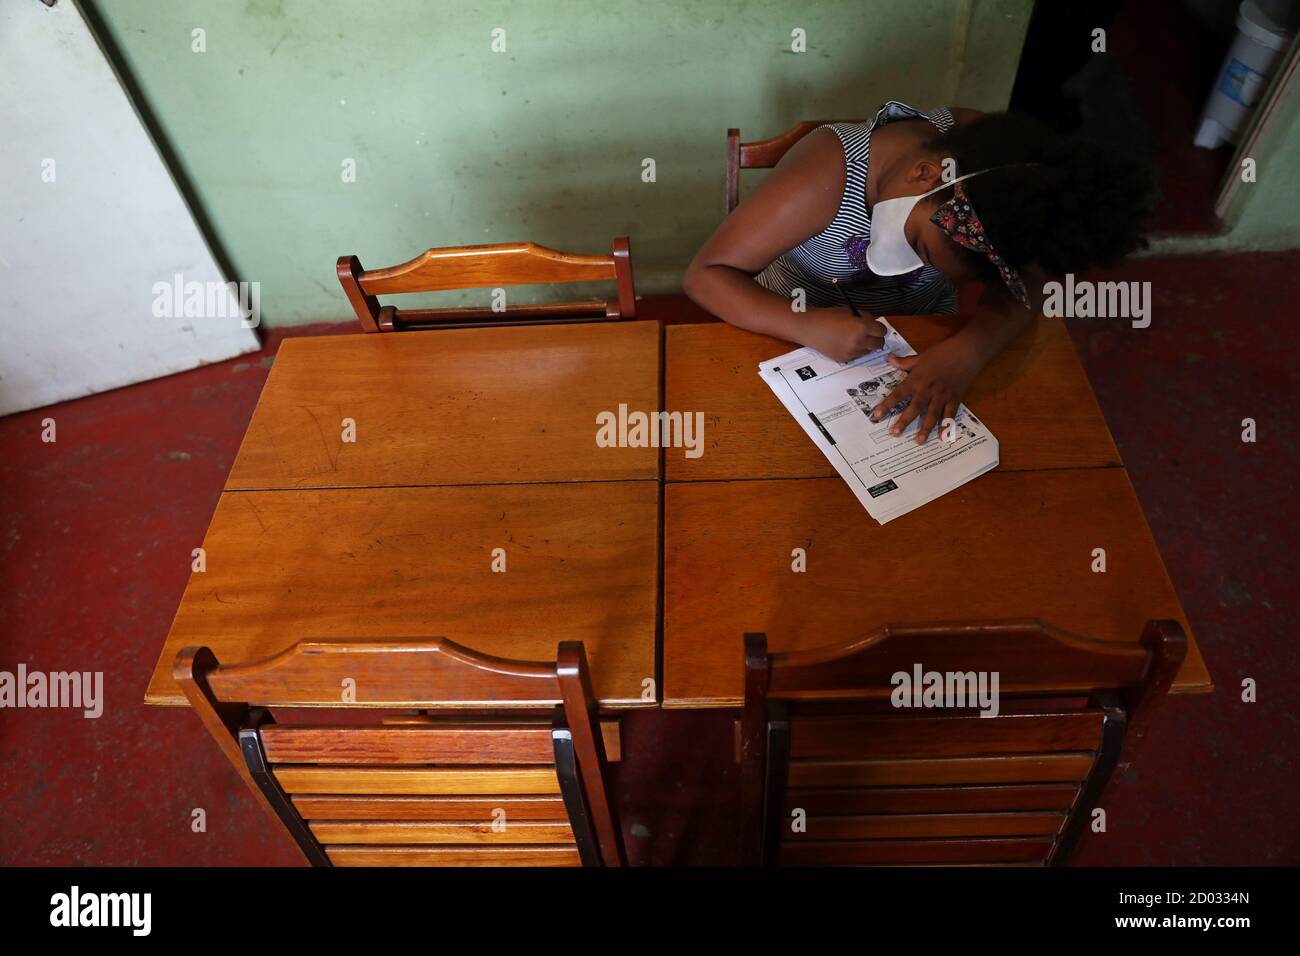 Rebecca Sabino, 8, does her homework as part of the Educacao na Quarentena project (Quarantine Education), as public schools are still closed, at her family's snack bar at Prazeres slum in Rio de Janeiro, Brazil October 1, 2020. Picture taken October 1, 2020. REUTERS/Pilar Olivares Stock Photo